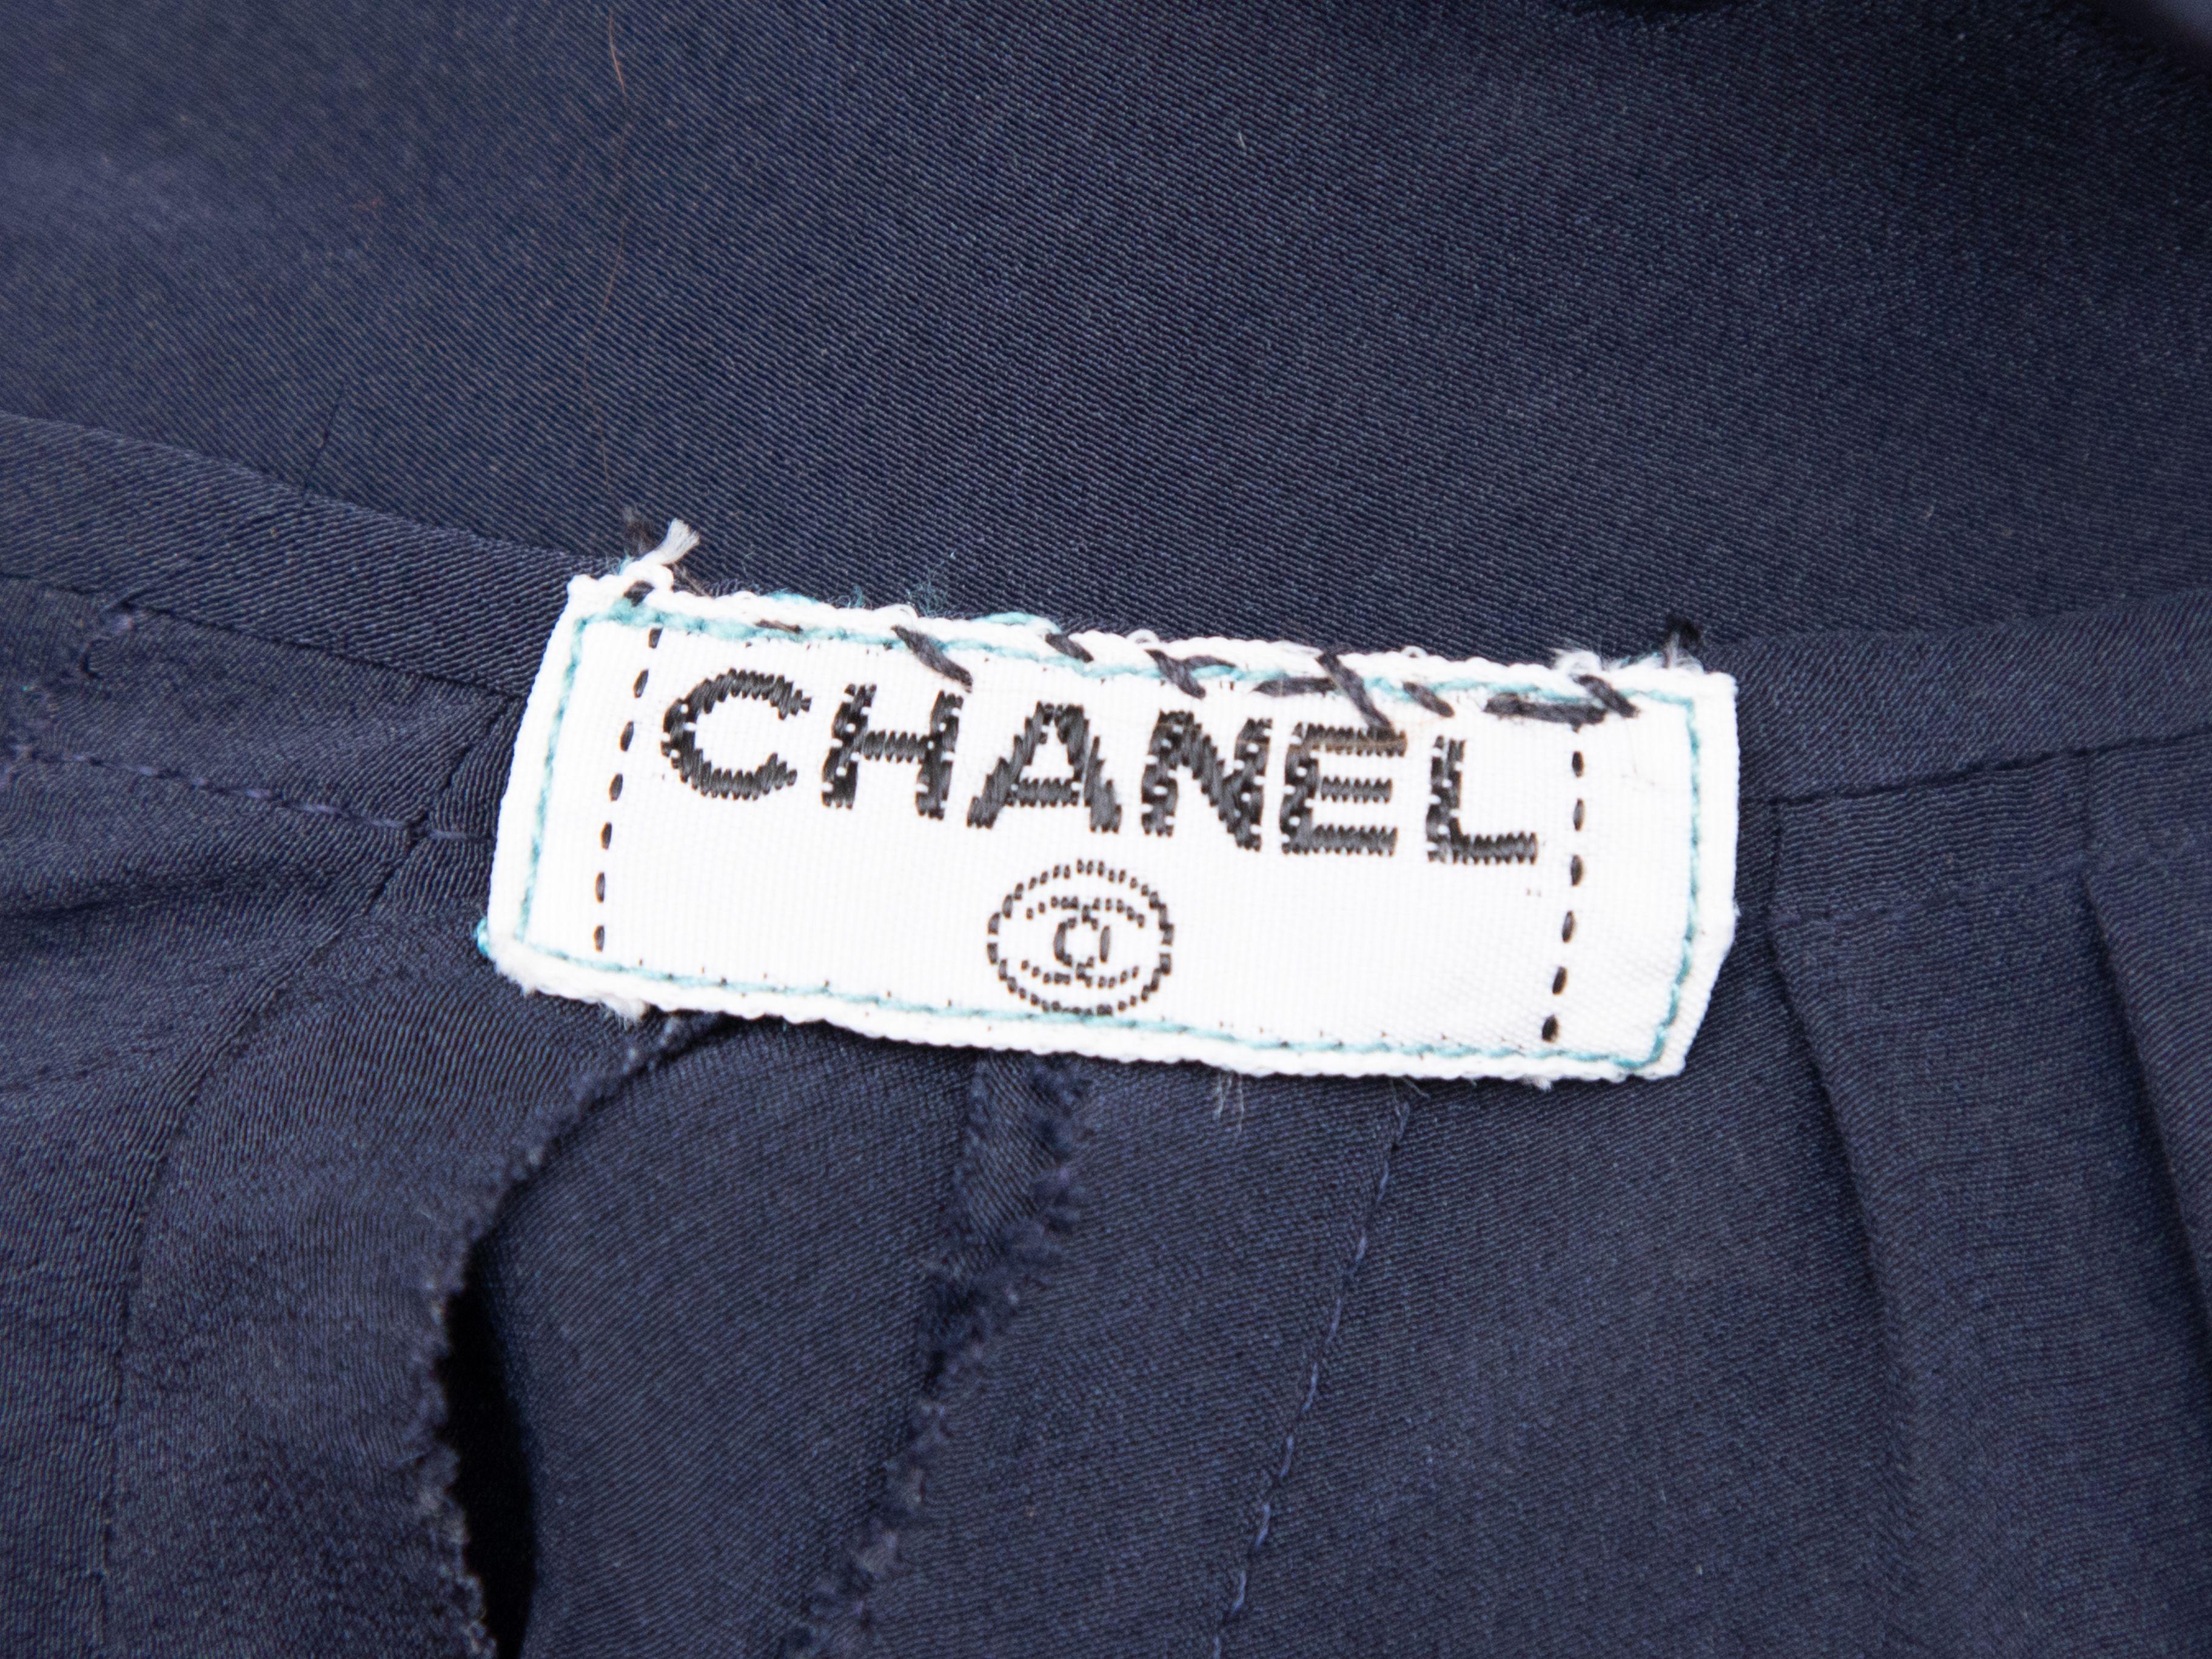 Product Details: Vintage navy long sleeve wrap dress by Chanel. Plunging V-neckline. Gold-tone button closures at nape. 34